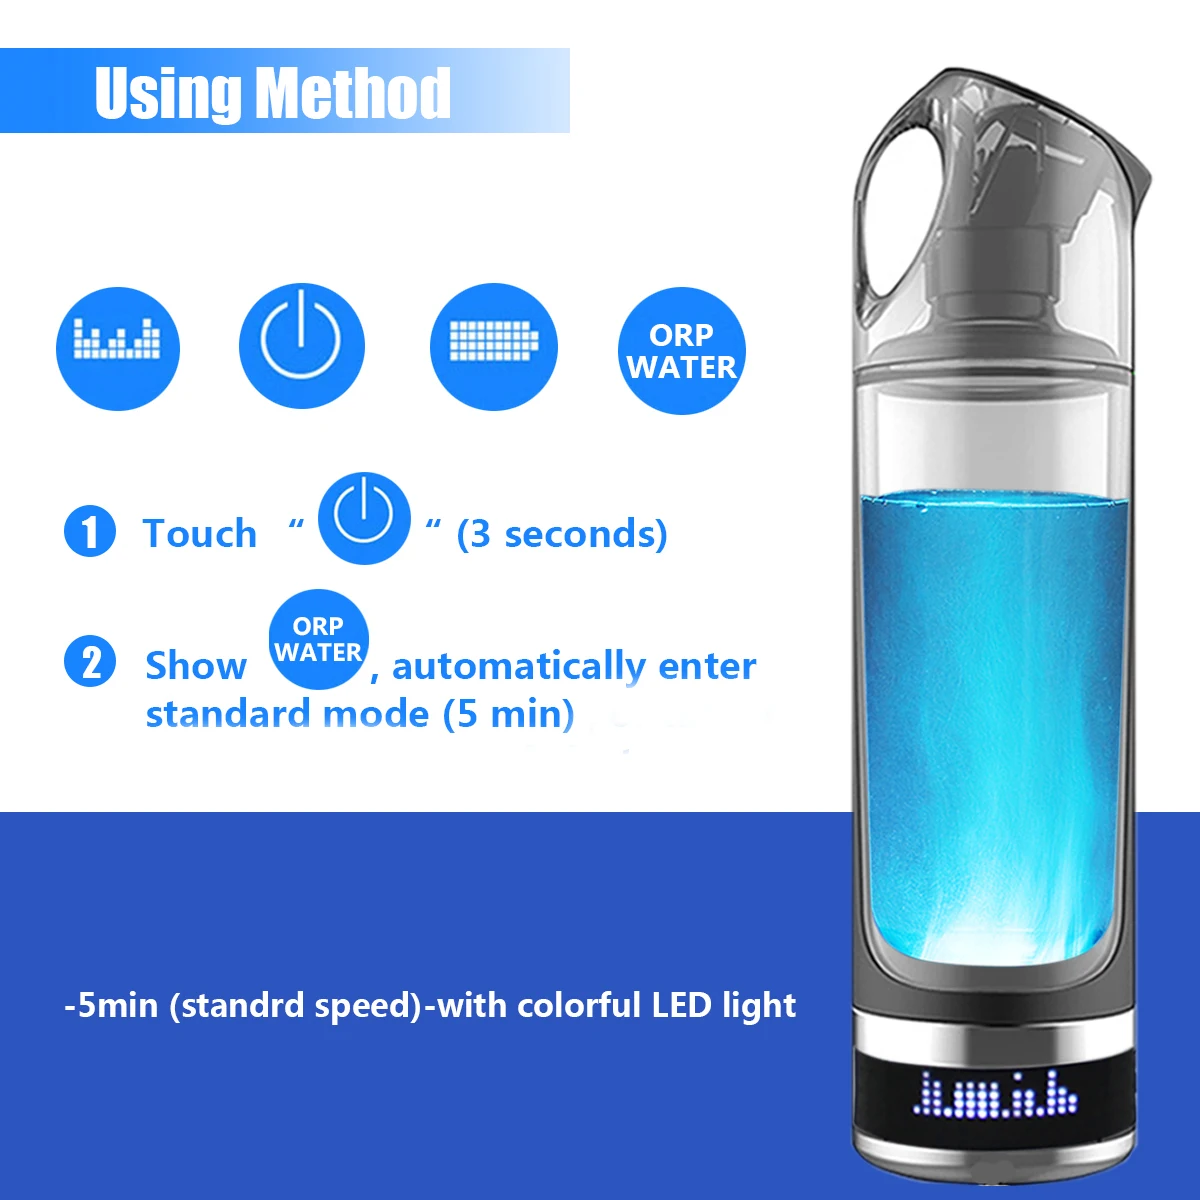 

500ml Hydrogen Rich Alkaline Water Bottle lonizer Generator LED RGB Portable Cup USB Rechargeable Anti-Aging Gift